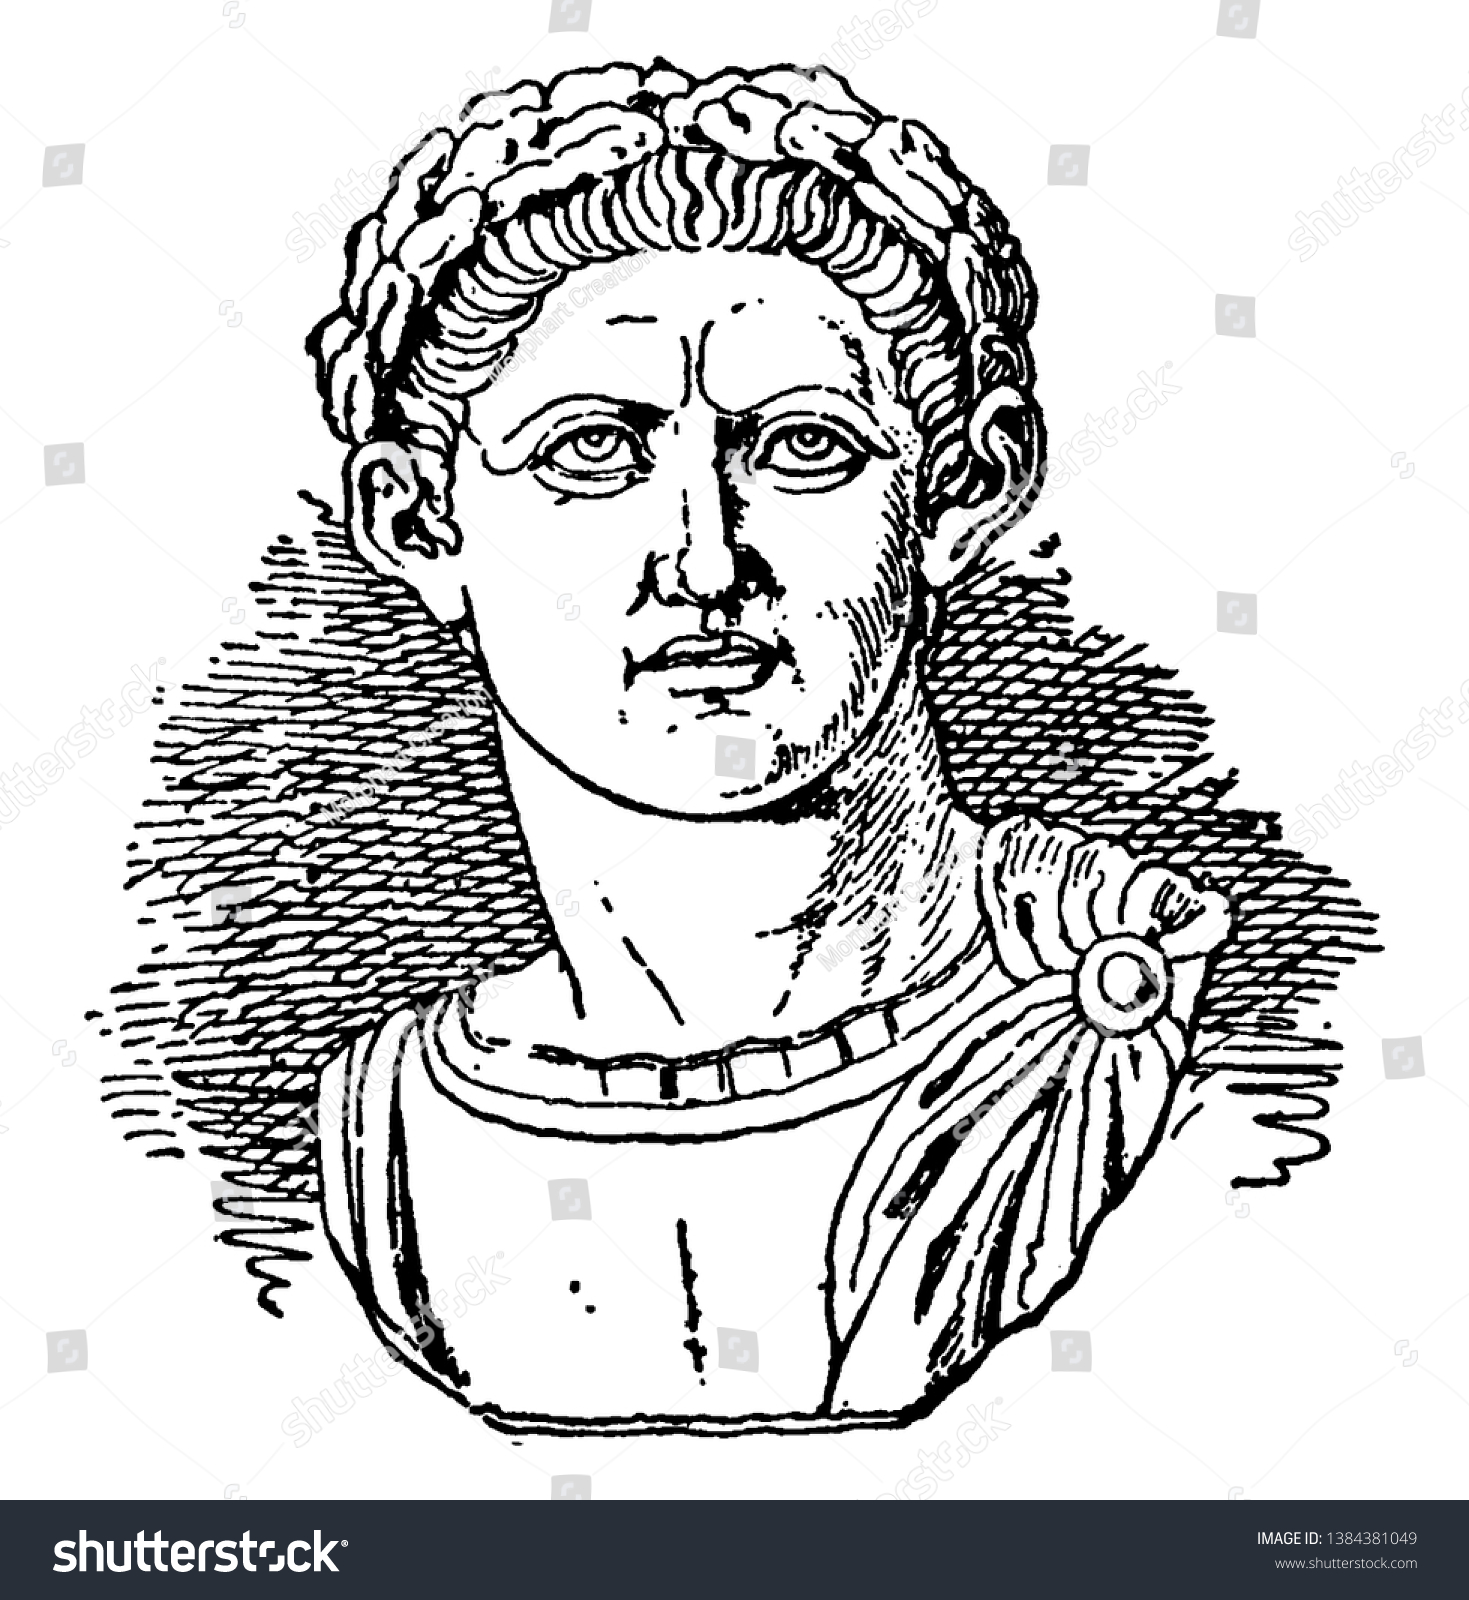 SVG of Constantine, 272 AD-337AD, he was emperor of Rome from 306 to 337, famous for being the first Christian Roman emperor, vintage line drawing or engraving illustration svg